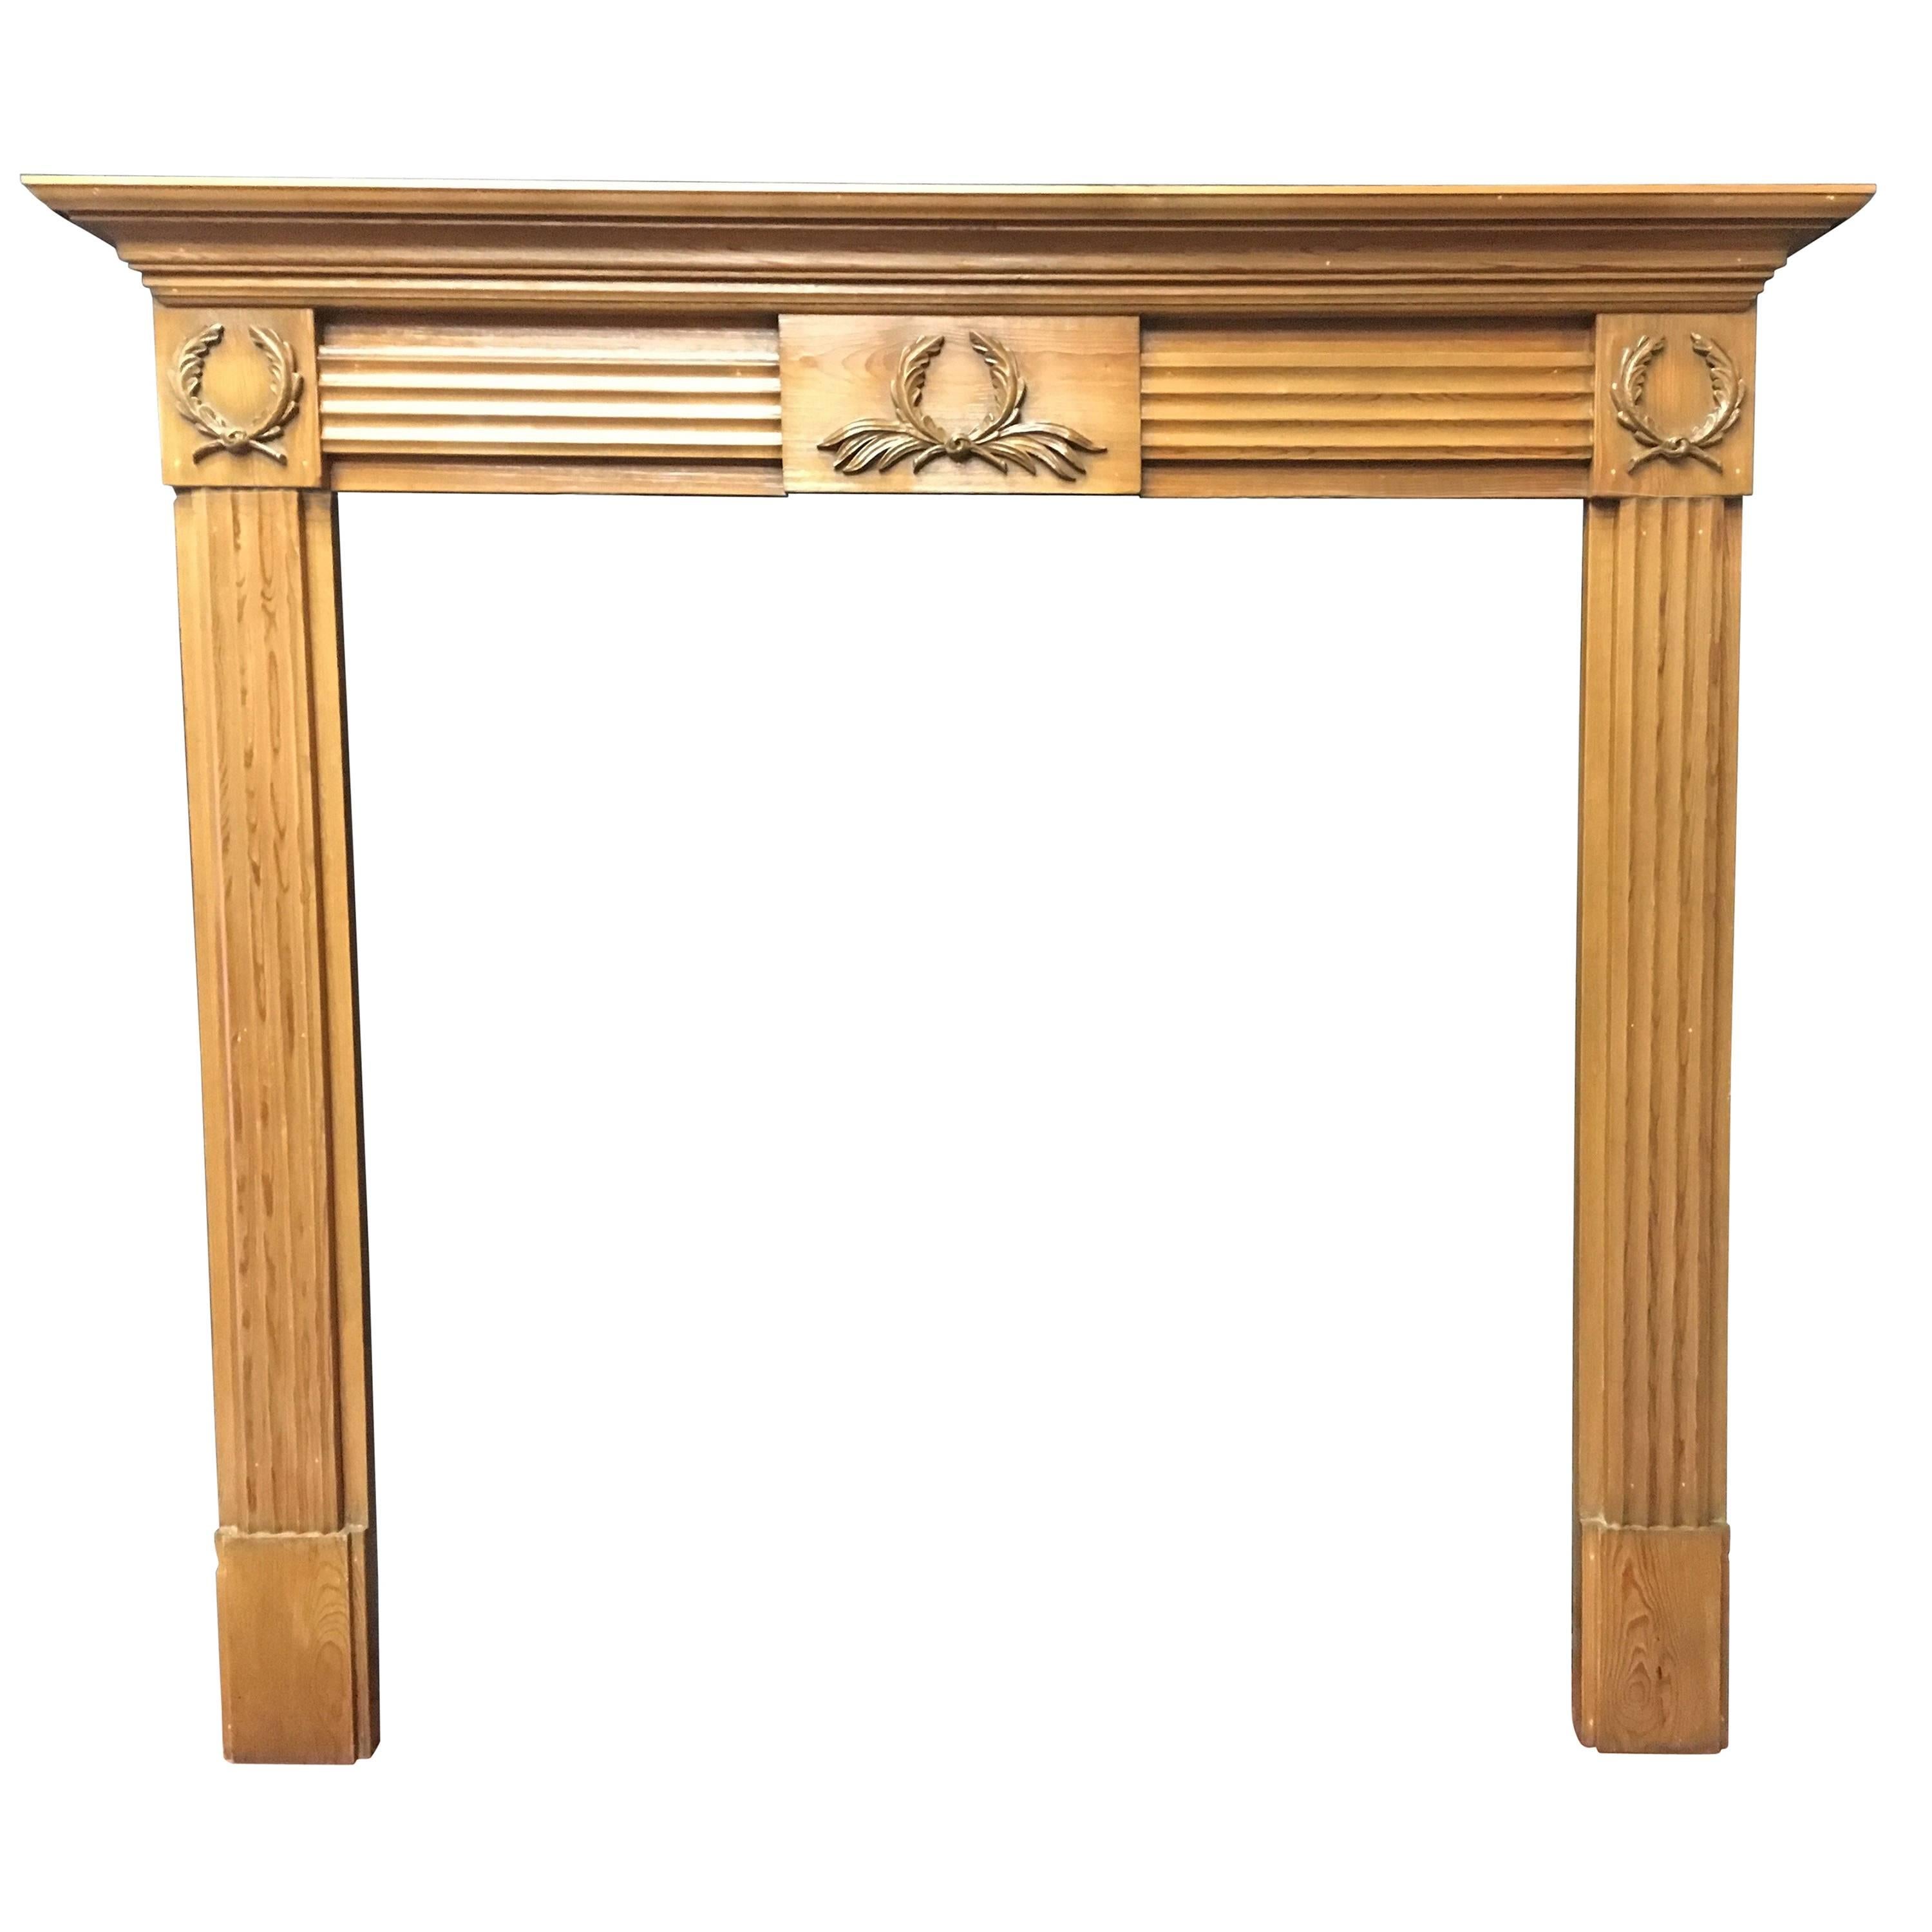 Aged Georgian Style Carved Pine Fireplace Surround. For Sale